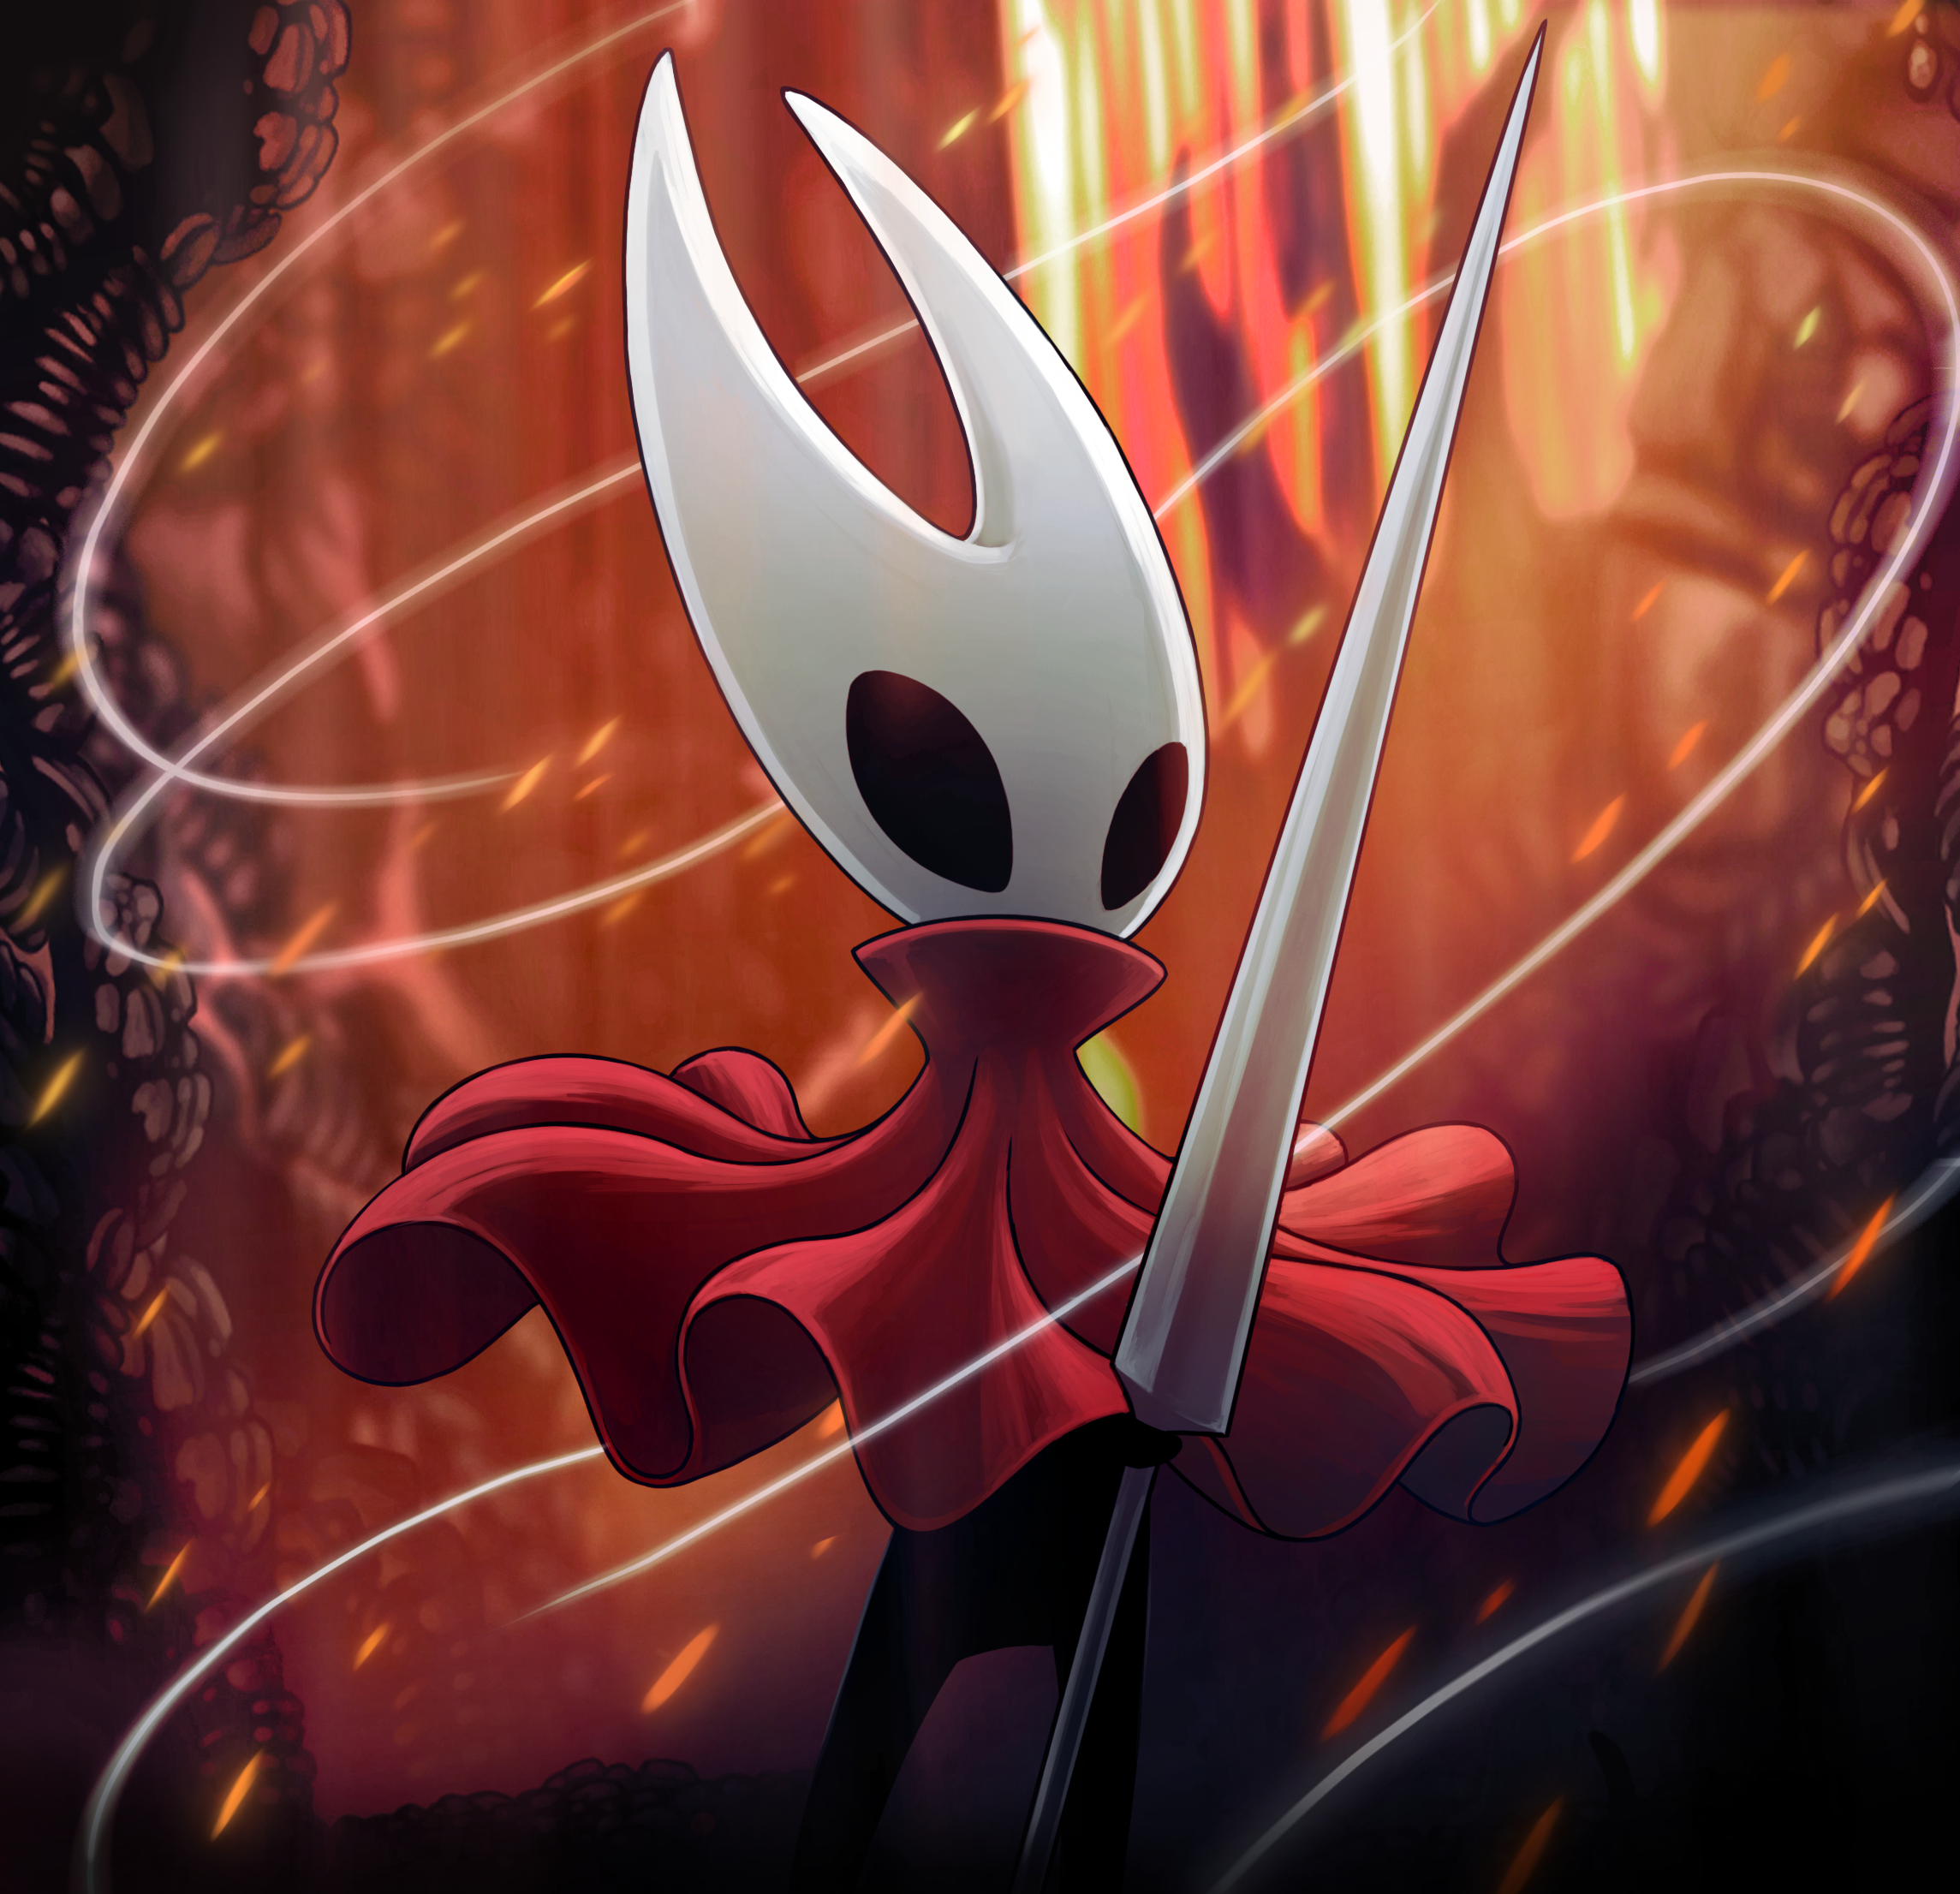 Hollow Knight Silksong announced for Nintendo Switch and PC   Polygon